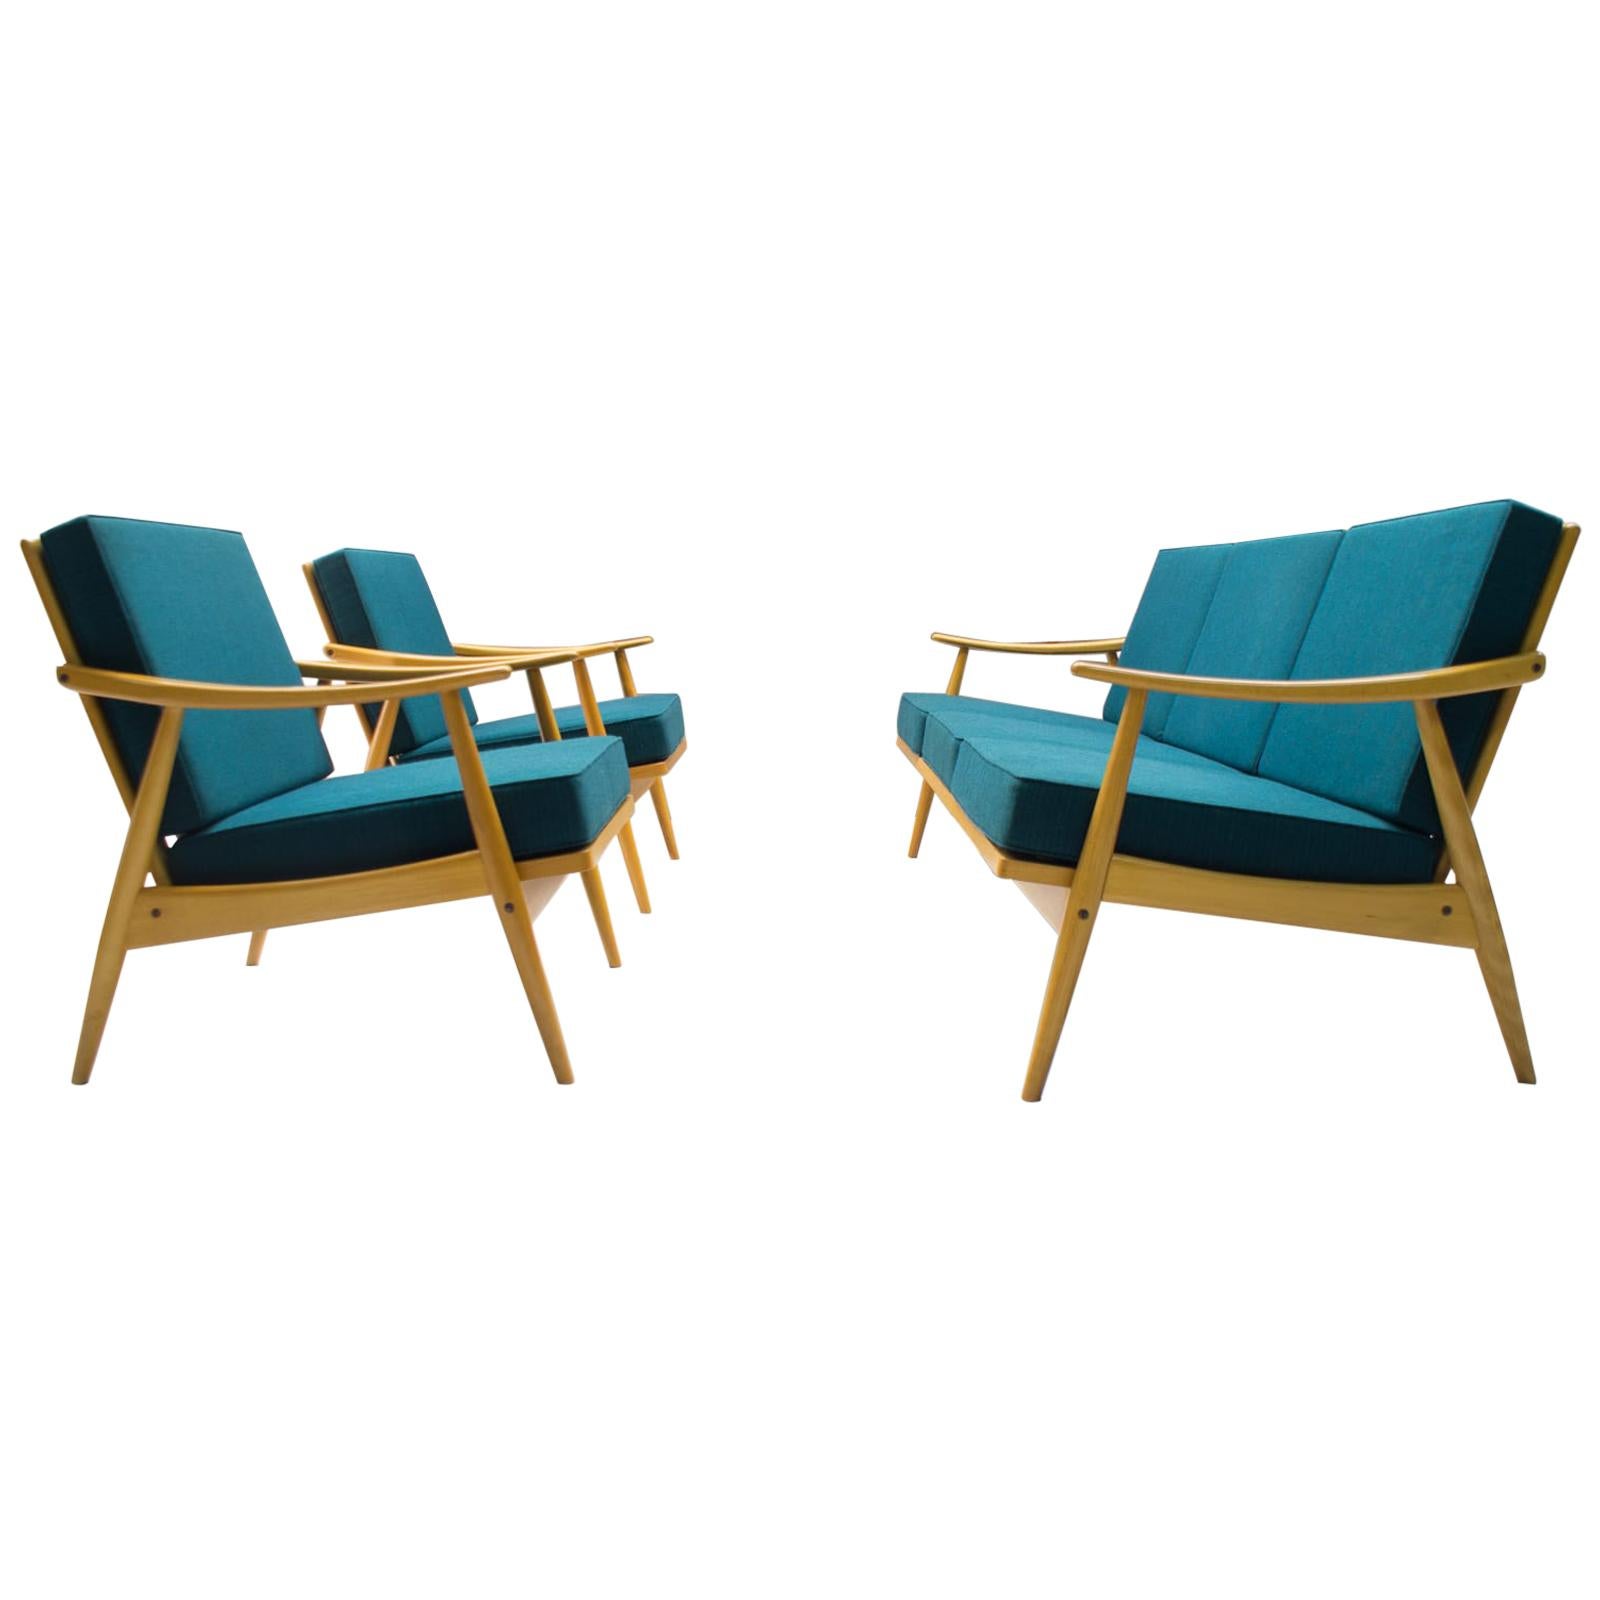 1960s Living Room Suite By Pierre Guariche Edited By Meurop For Sale At 1stdibs 